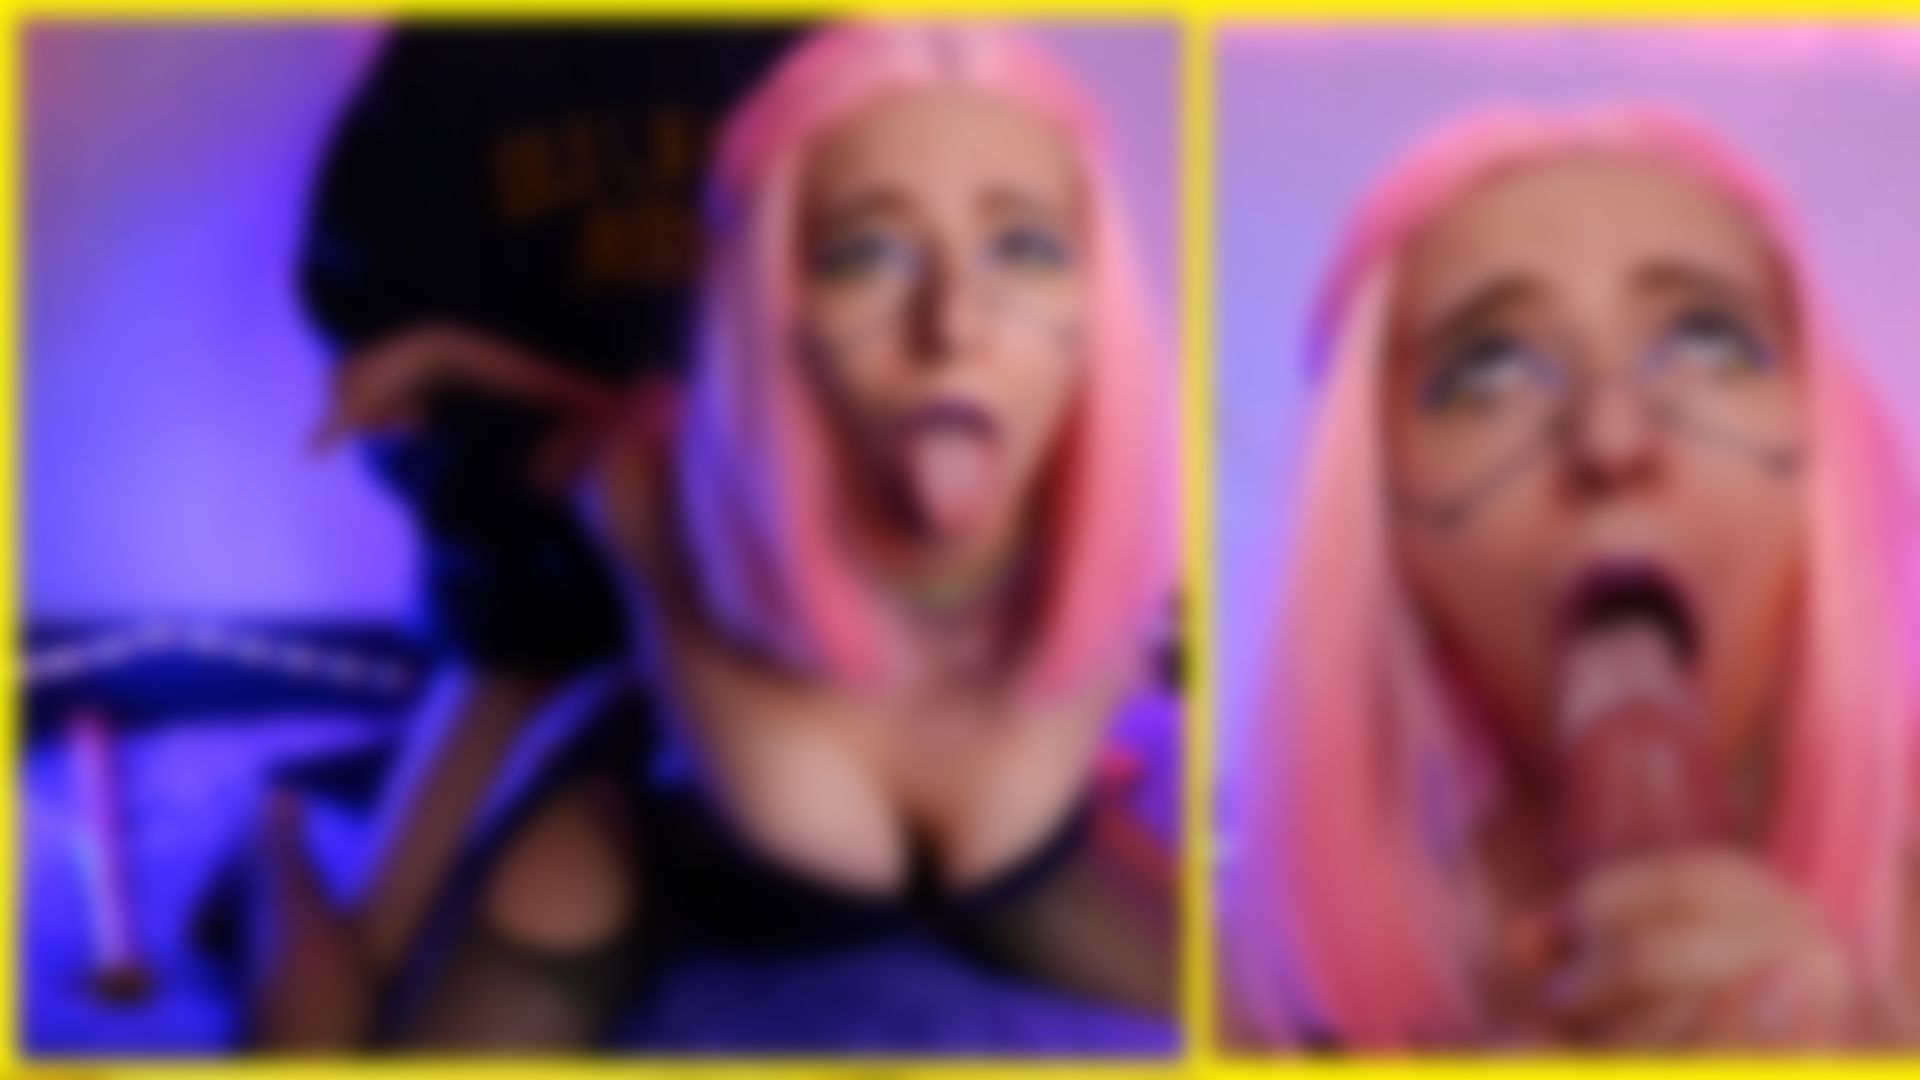 c*****e : Cosplay on Cyberpunk, High quality, Rough sex, doggy-style, cowgirl, closeup pussy, creampie, blowjob, cum in mouth, cum play.